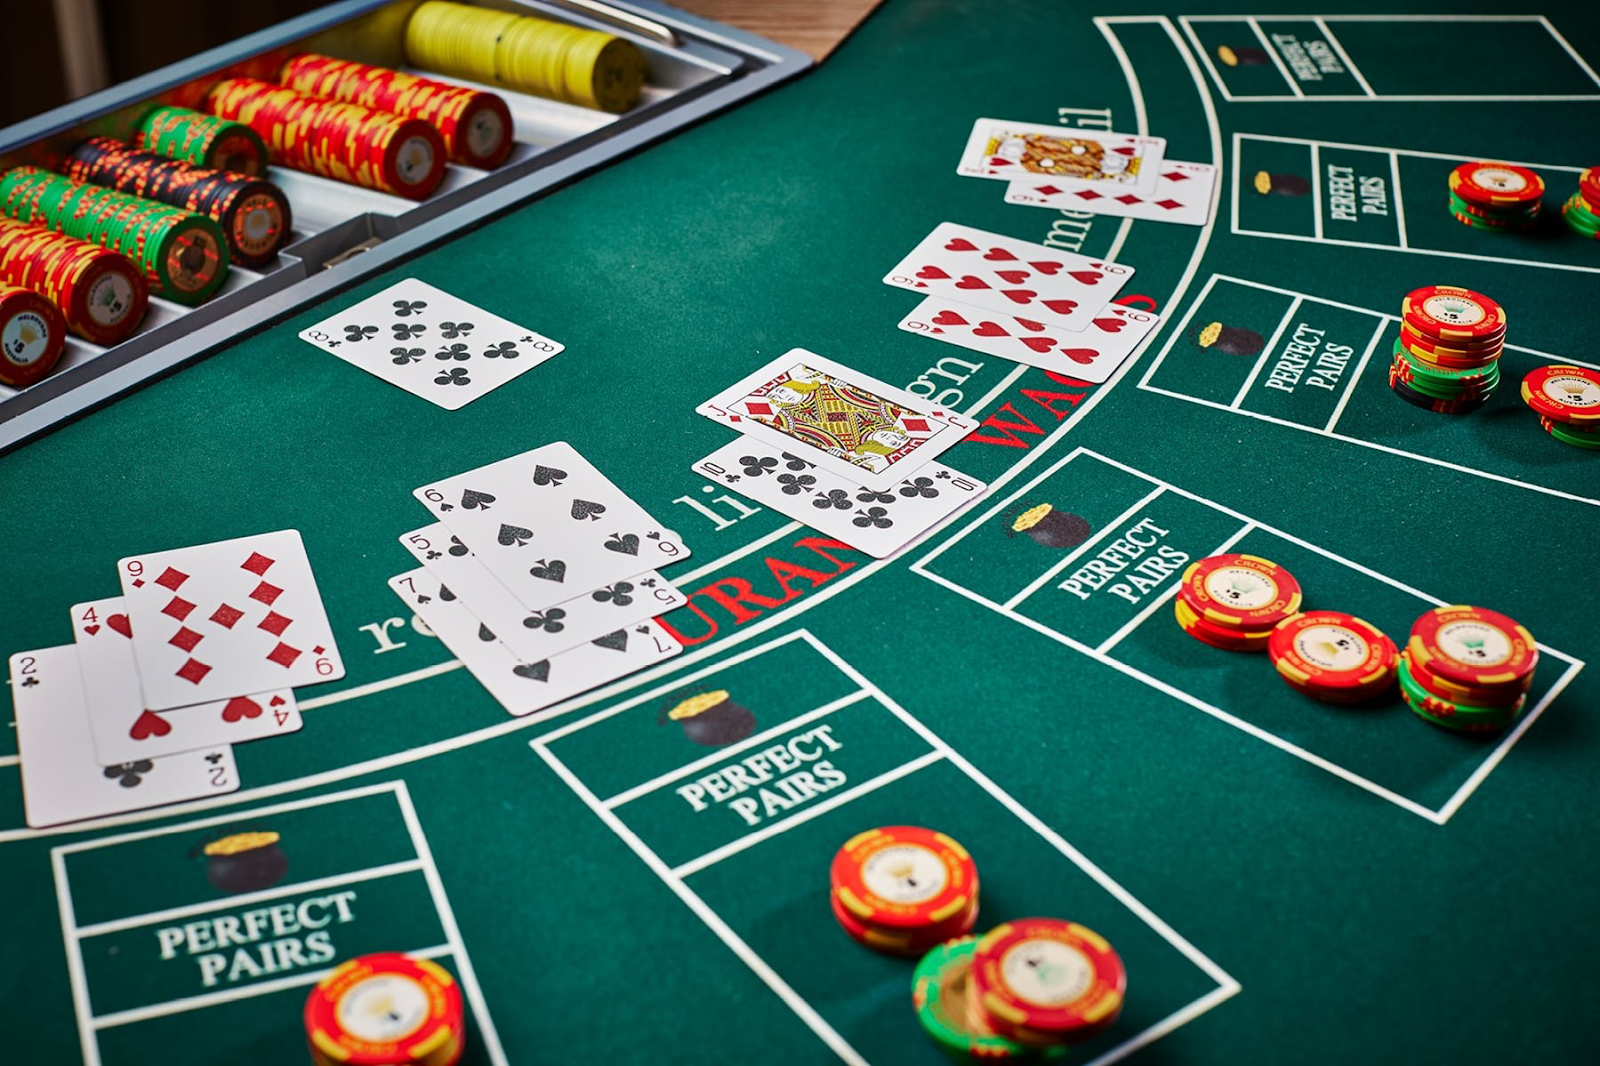 High stakes: the cryptocurrency casino king who bought the most